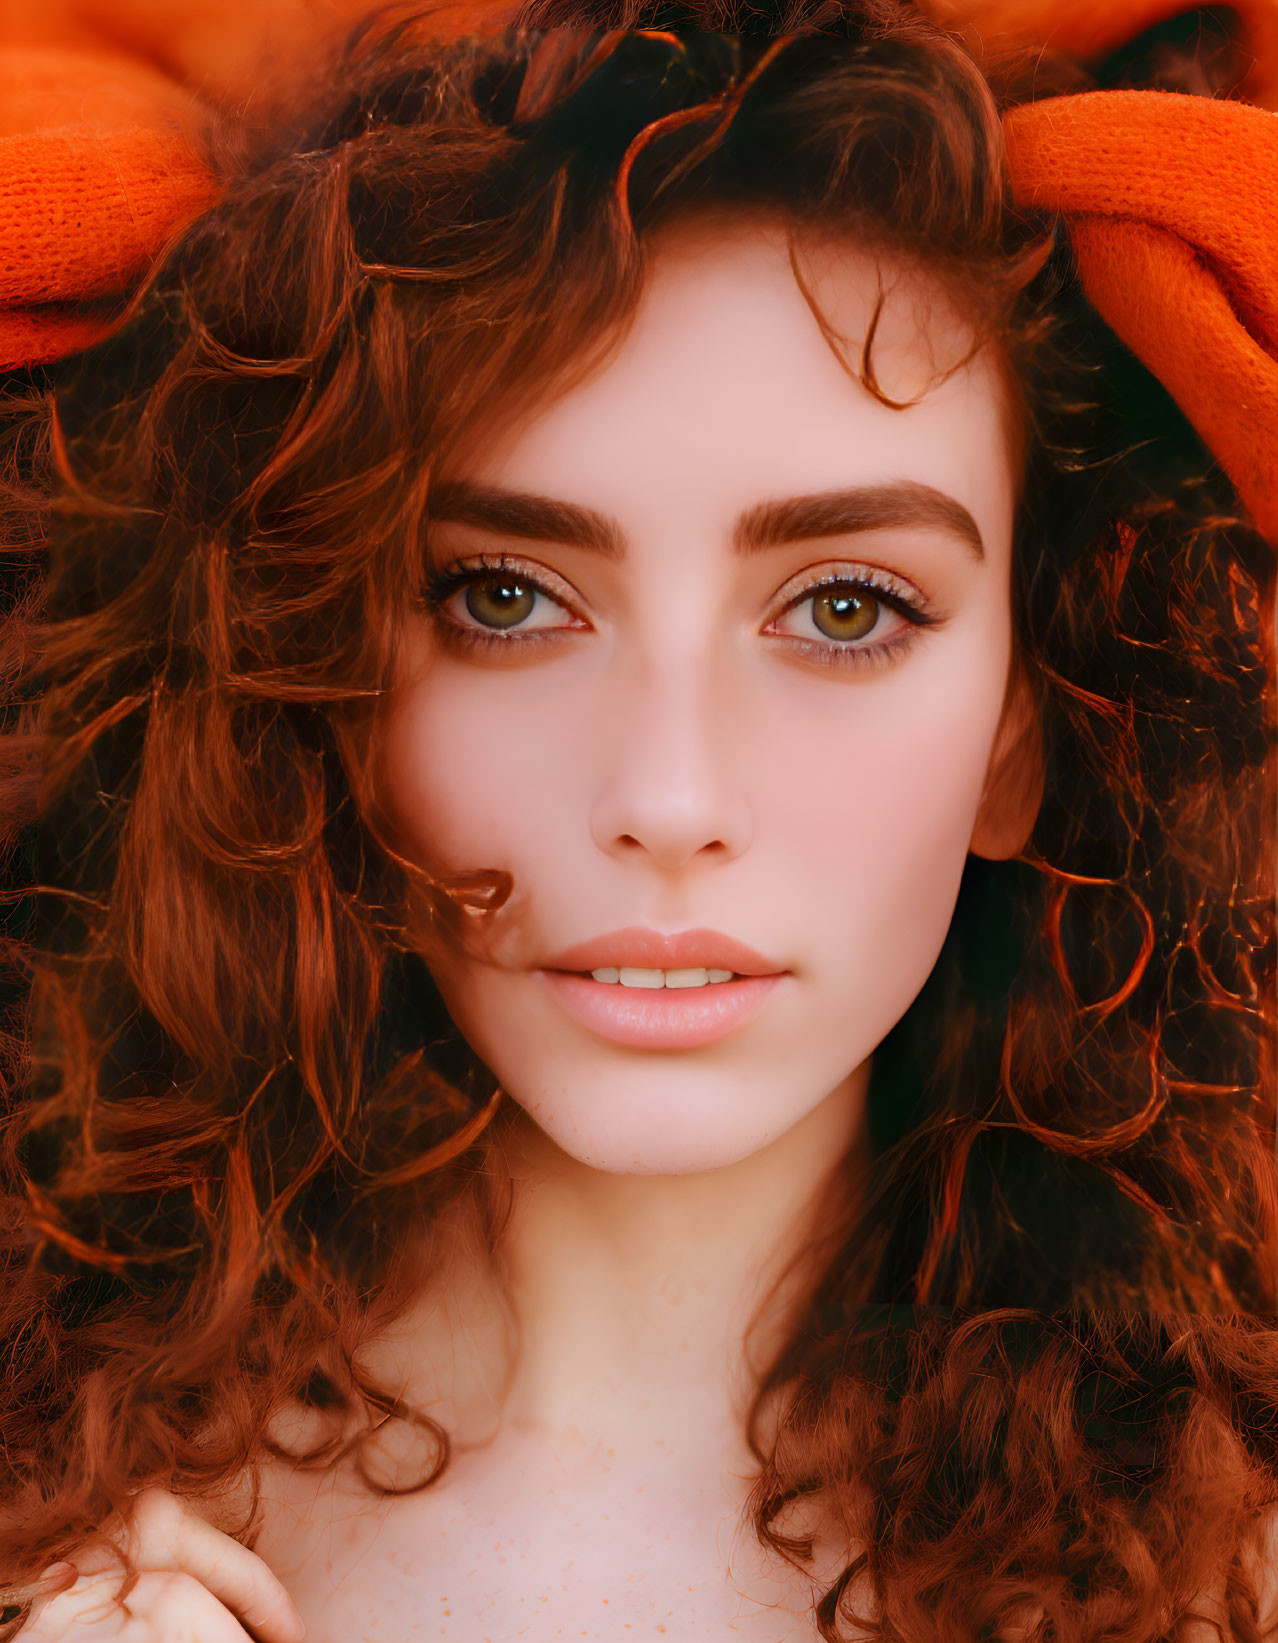 Curly Red-Haired Woman with Green Eyes and Orange Headband